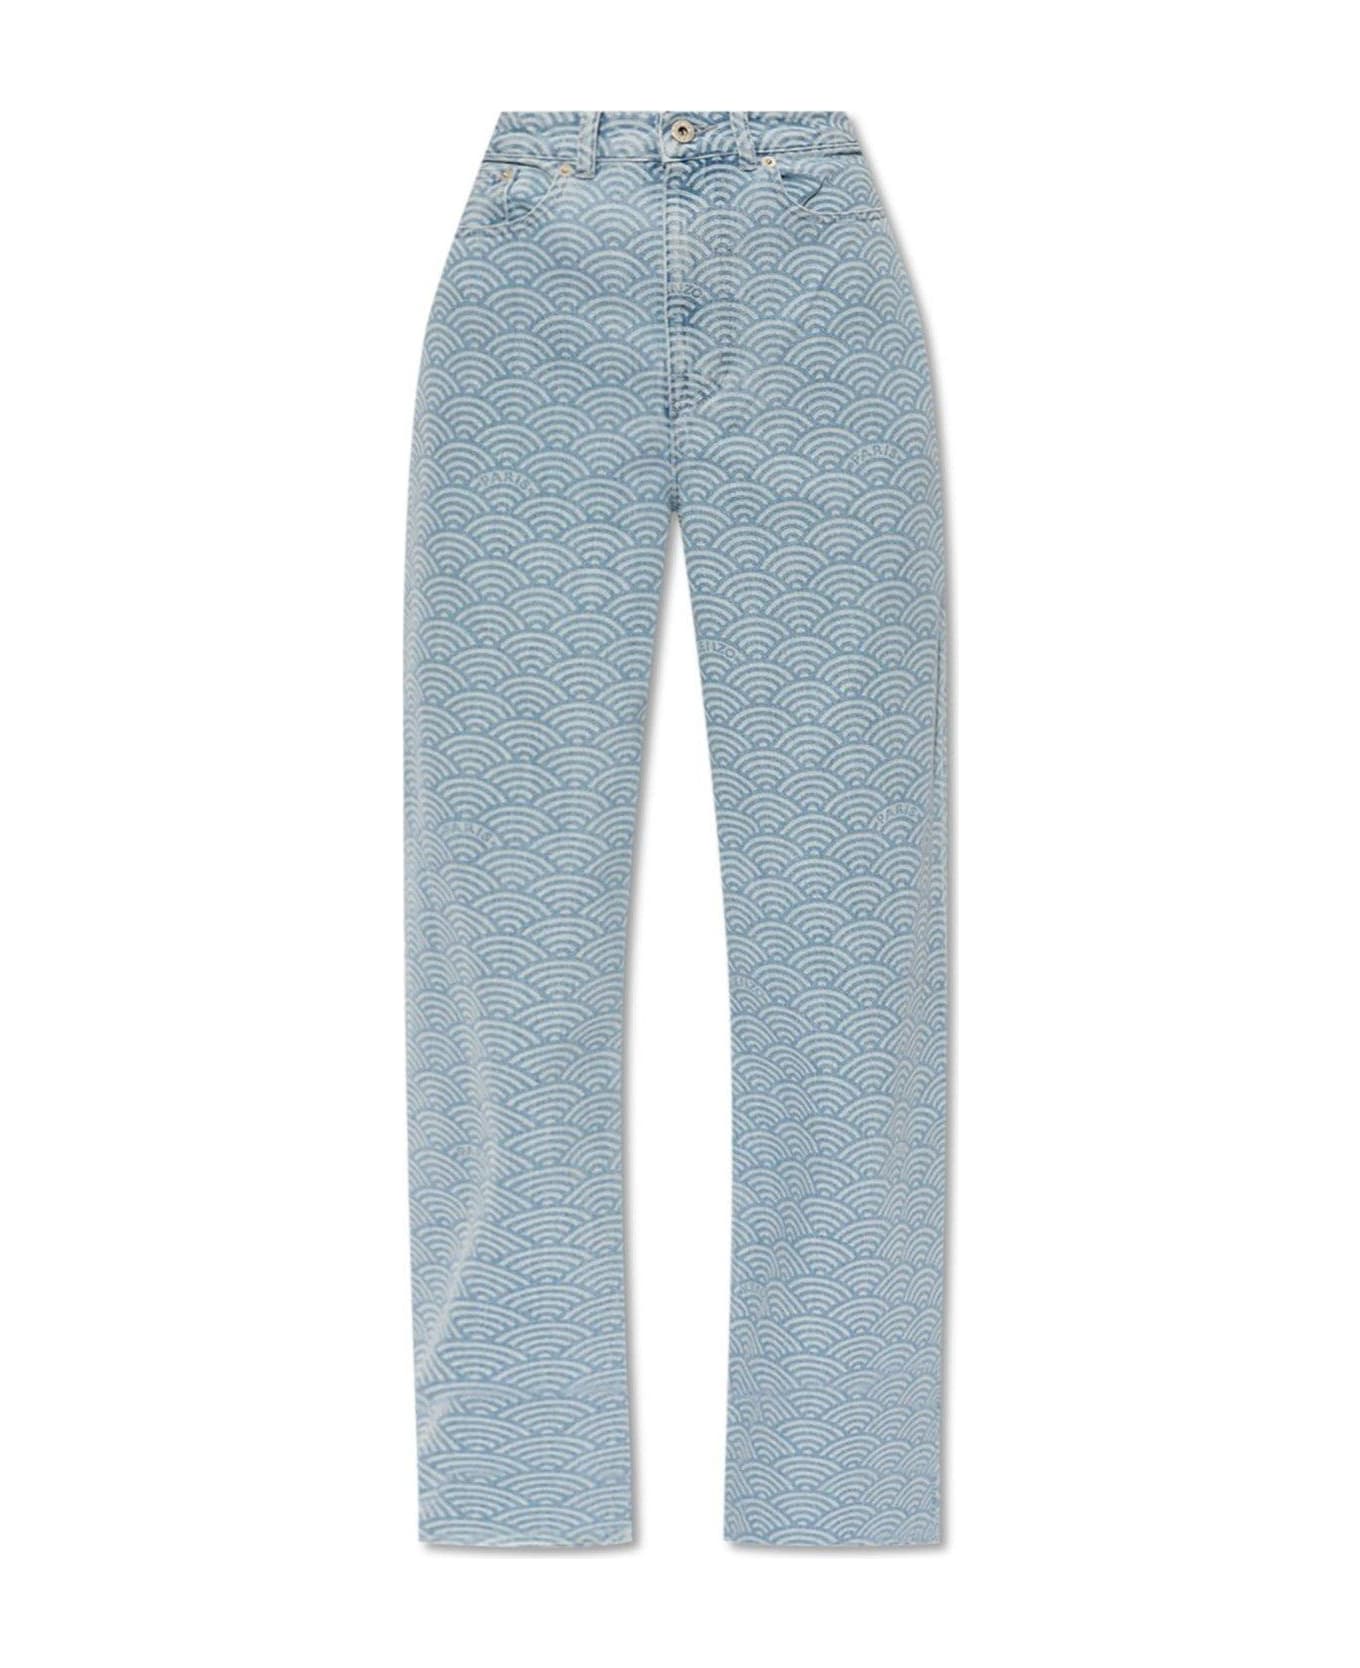 Kenzo Ayame Wide Fit Jeans - Grey ボトムス